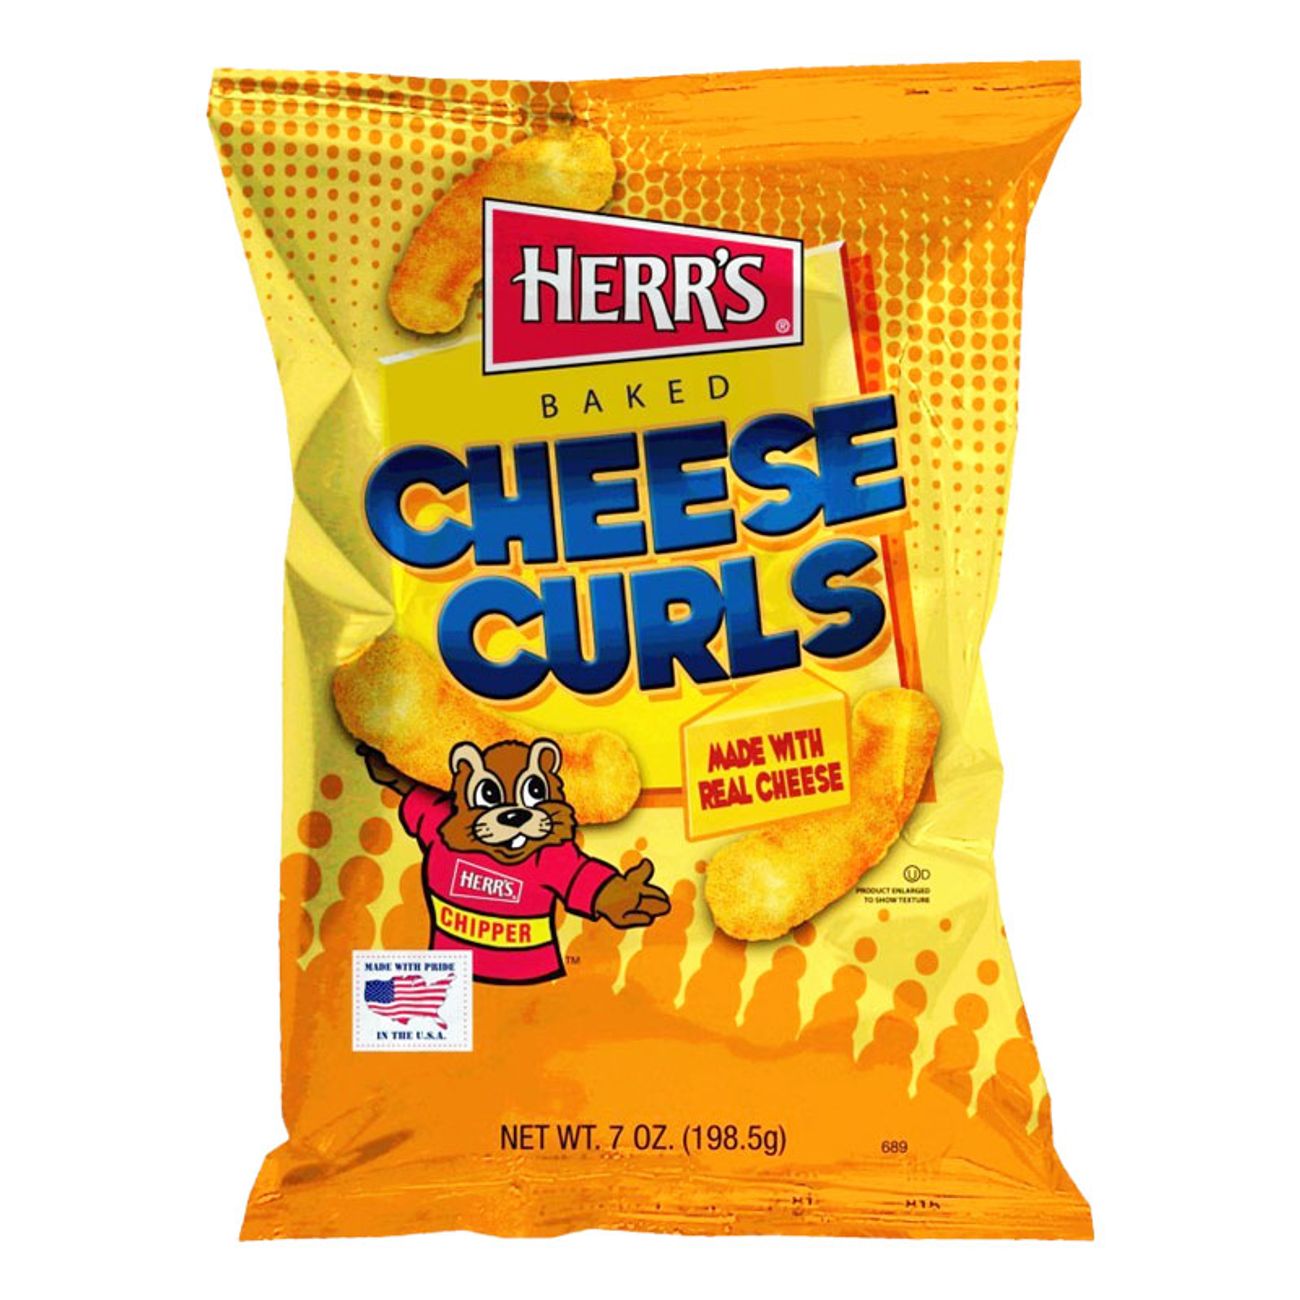 herrs-baked-cheese-curls-1